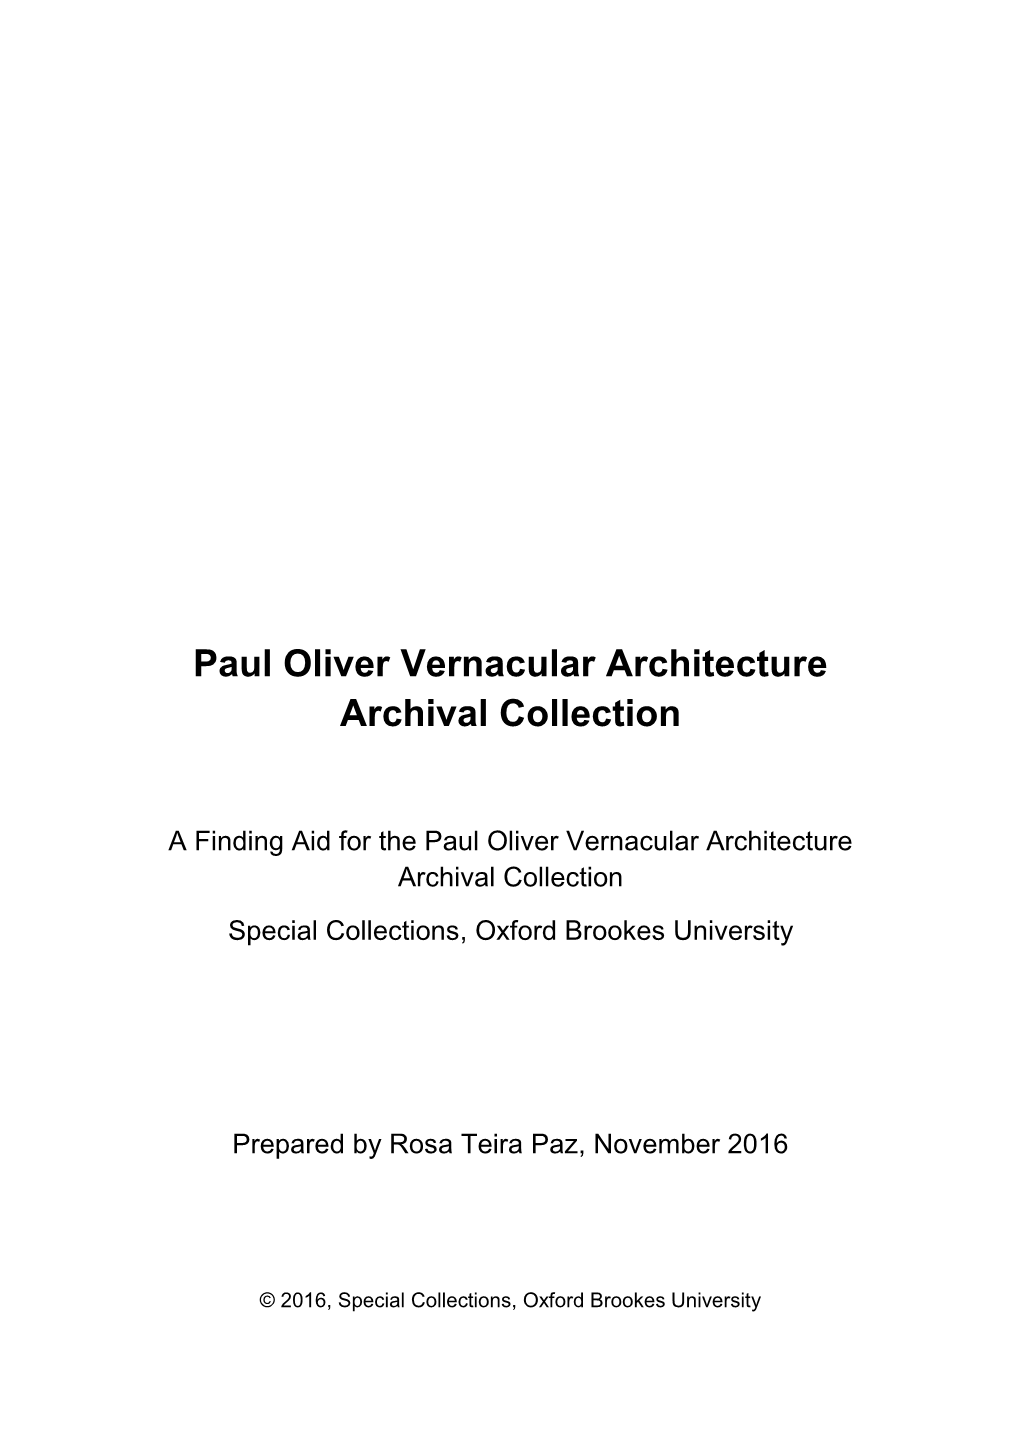 Paul Oliver Vernacular Architecture Archival Collection